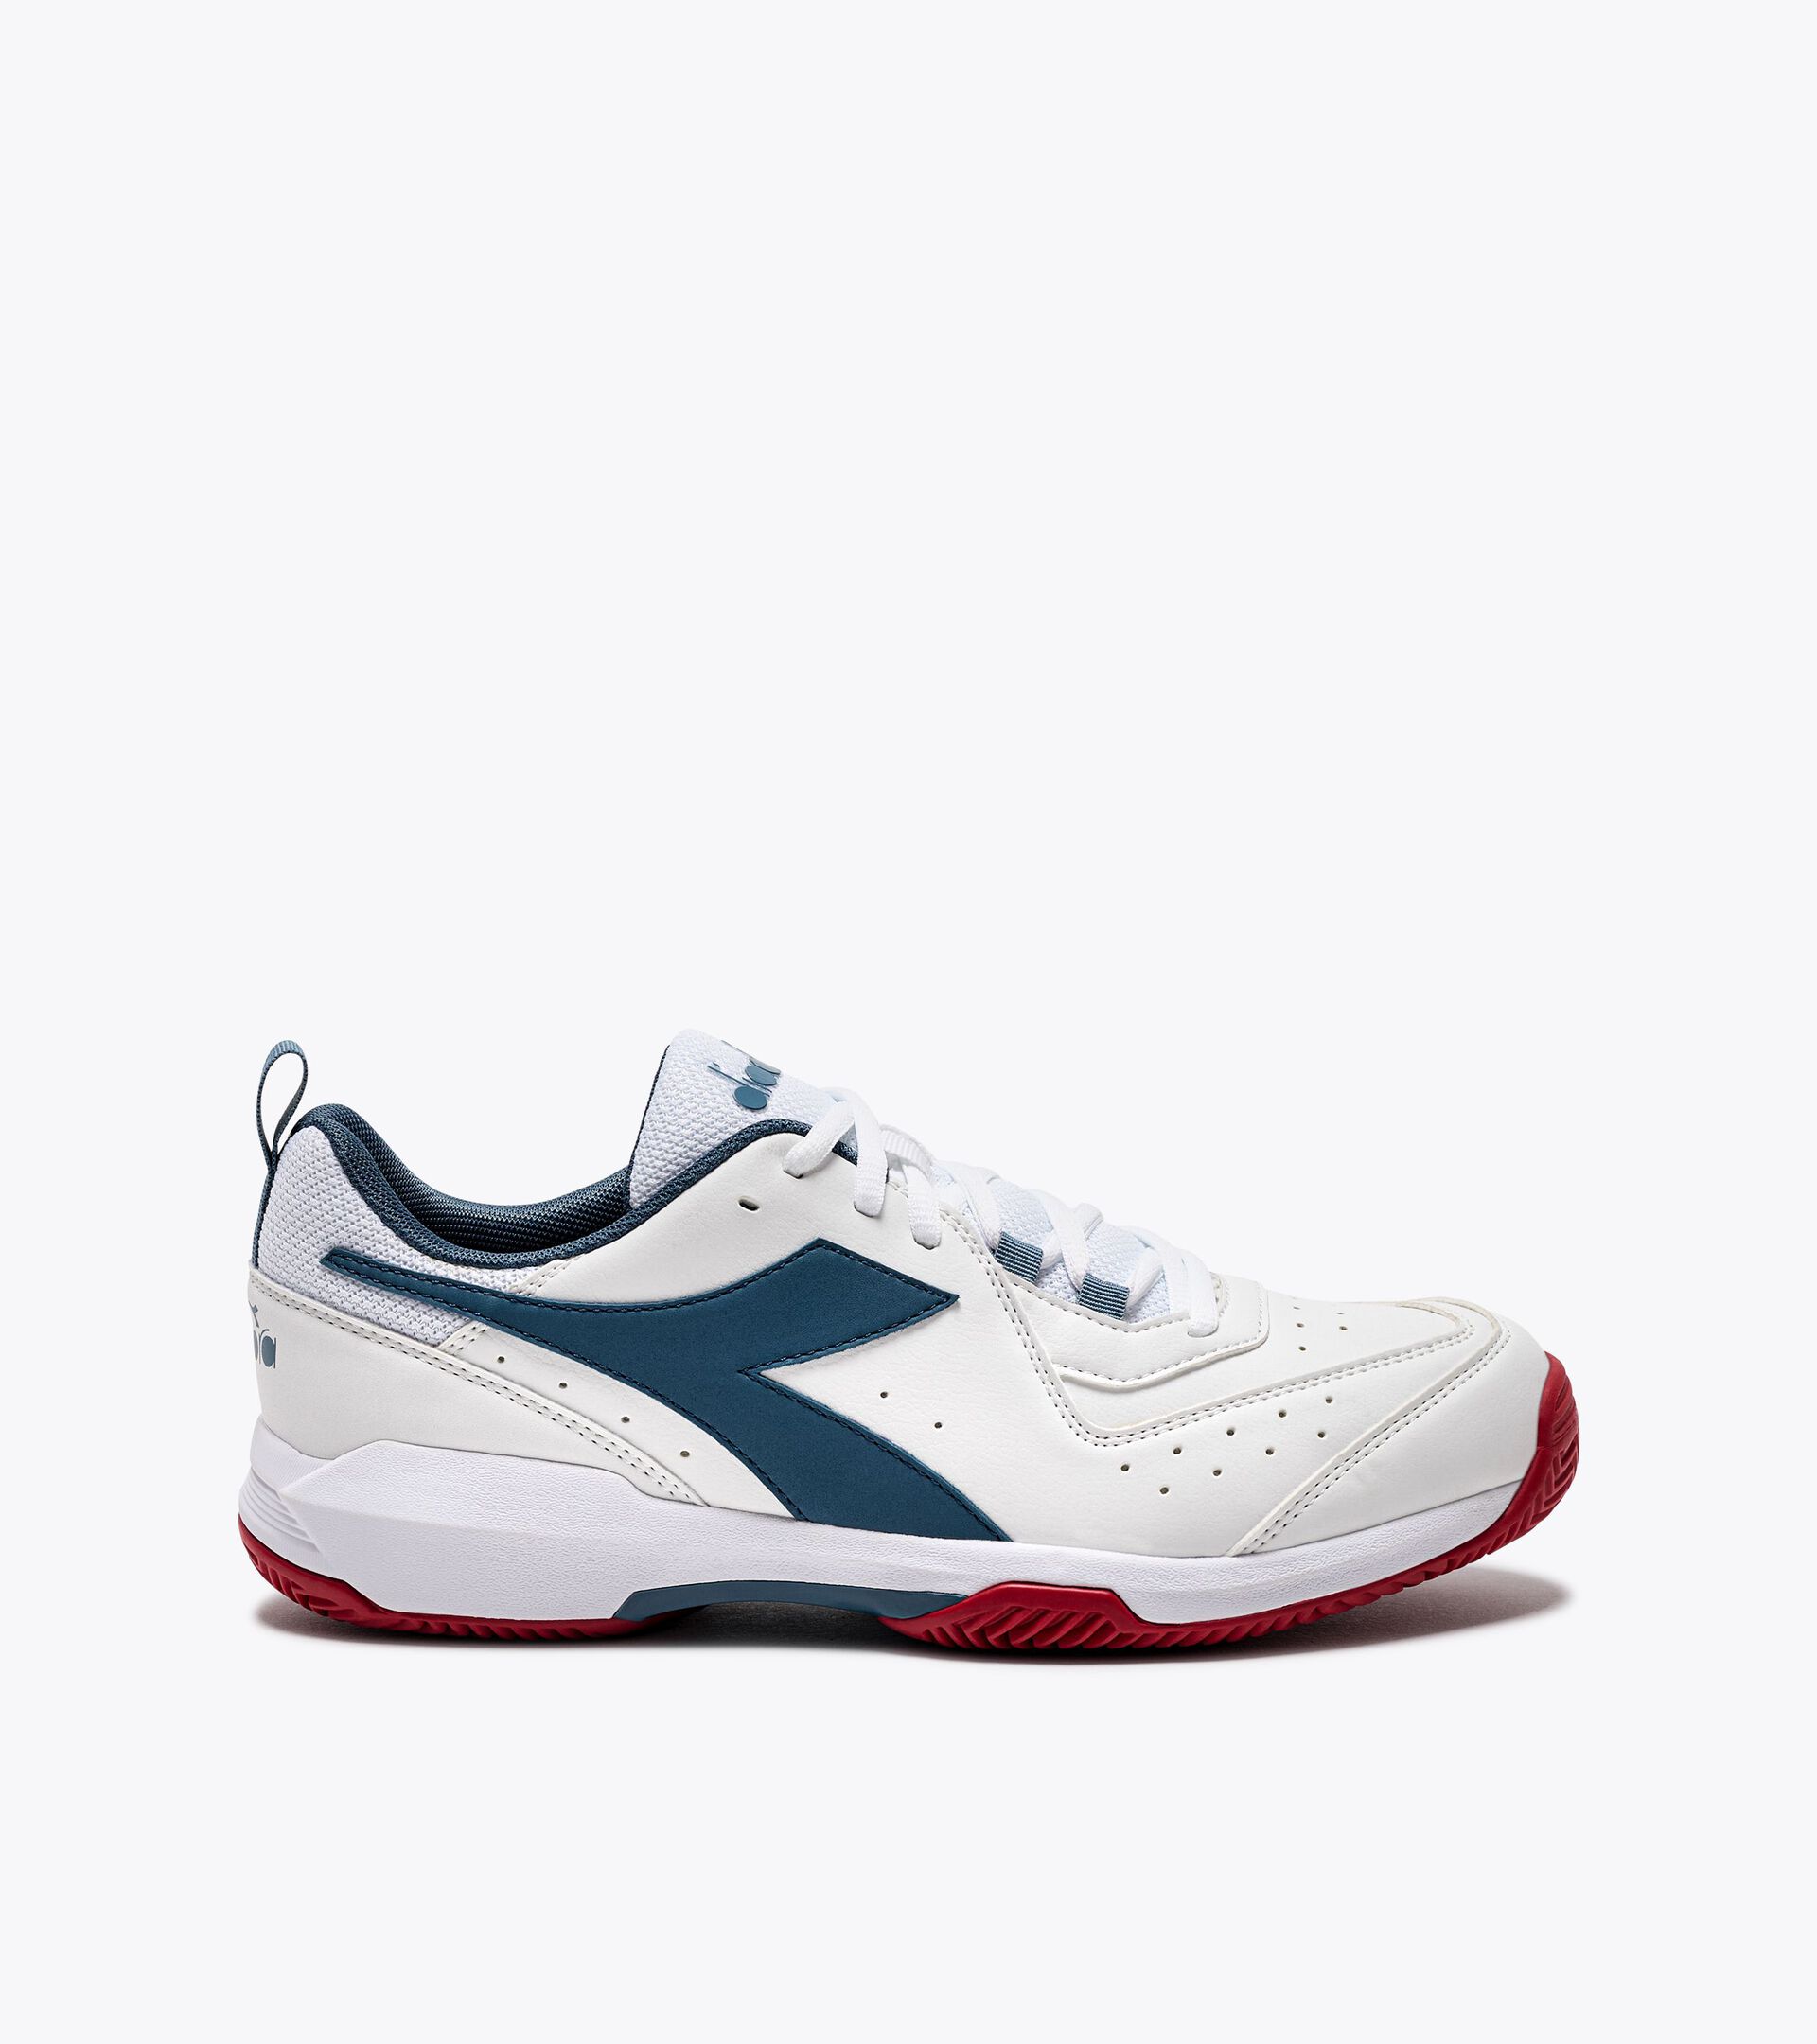 Tennis shoes for clay courts - Men S.CHALLENGE 5 SL CLAY WHITE/OCEANVIEW/SALSA - Diadora